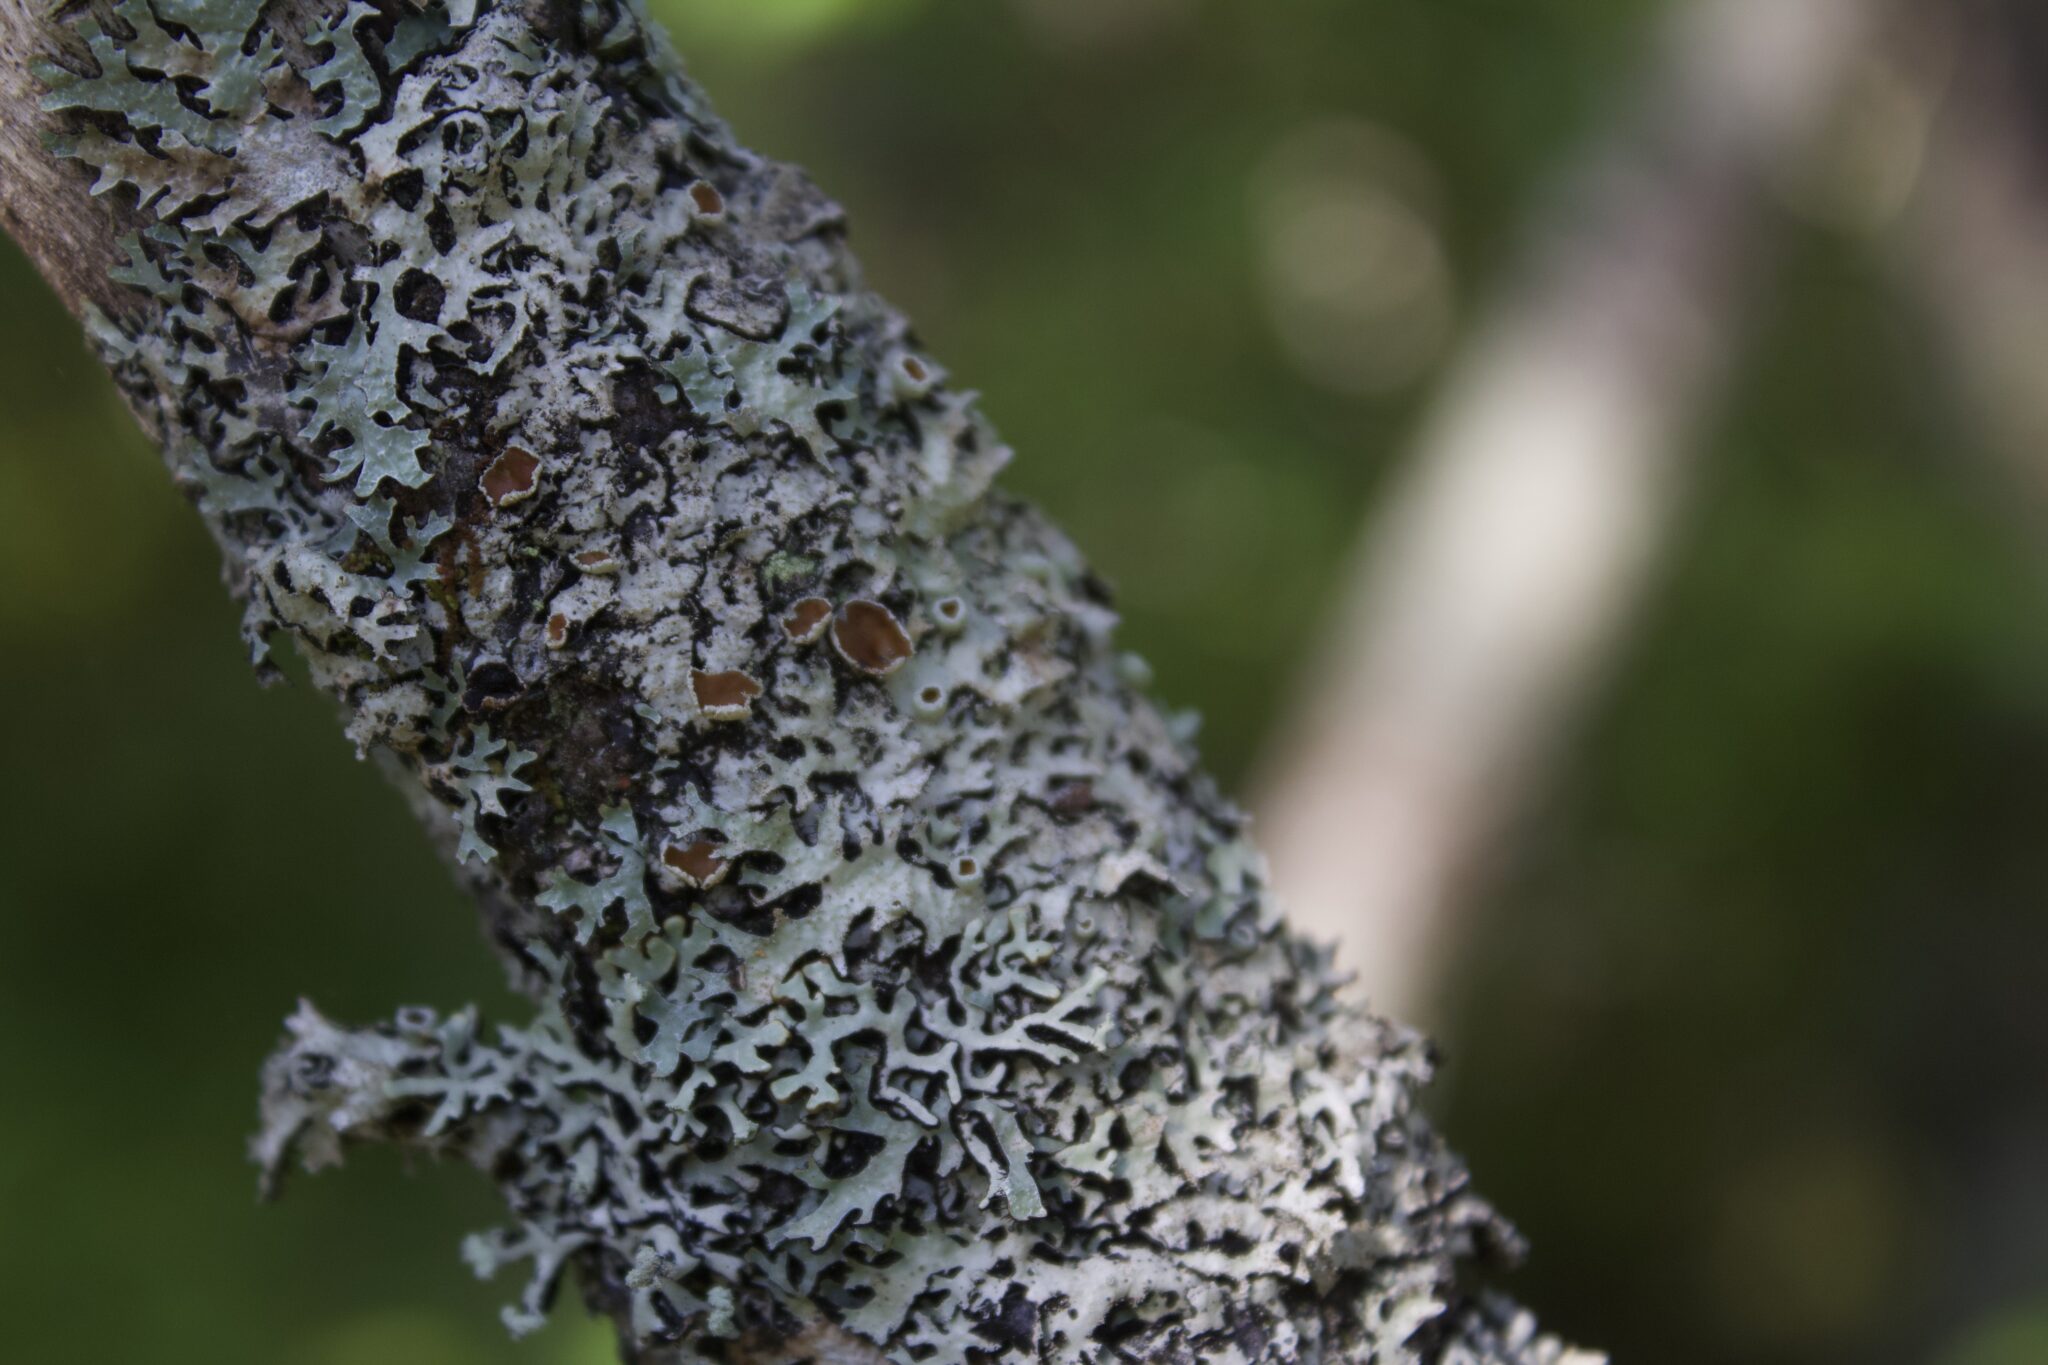 Blue-gray lichen grows on a tree branch.